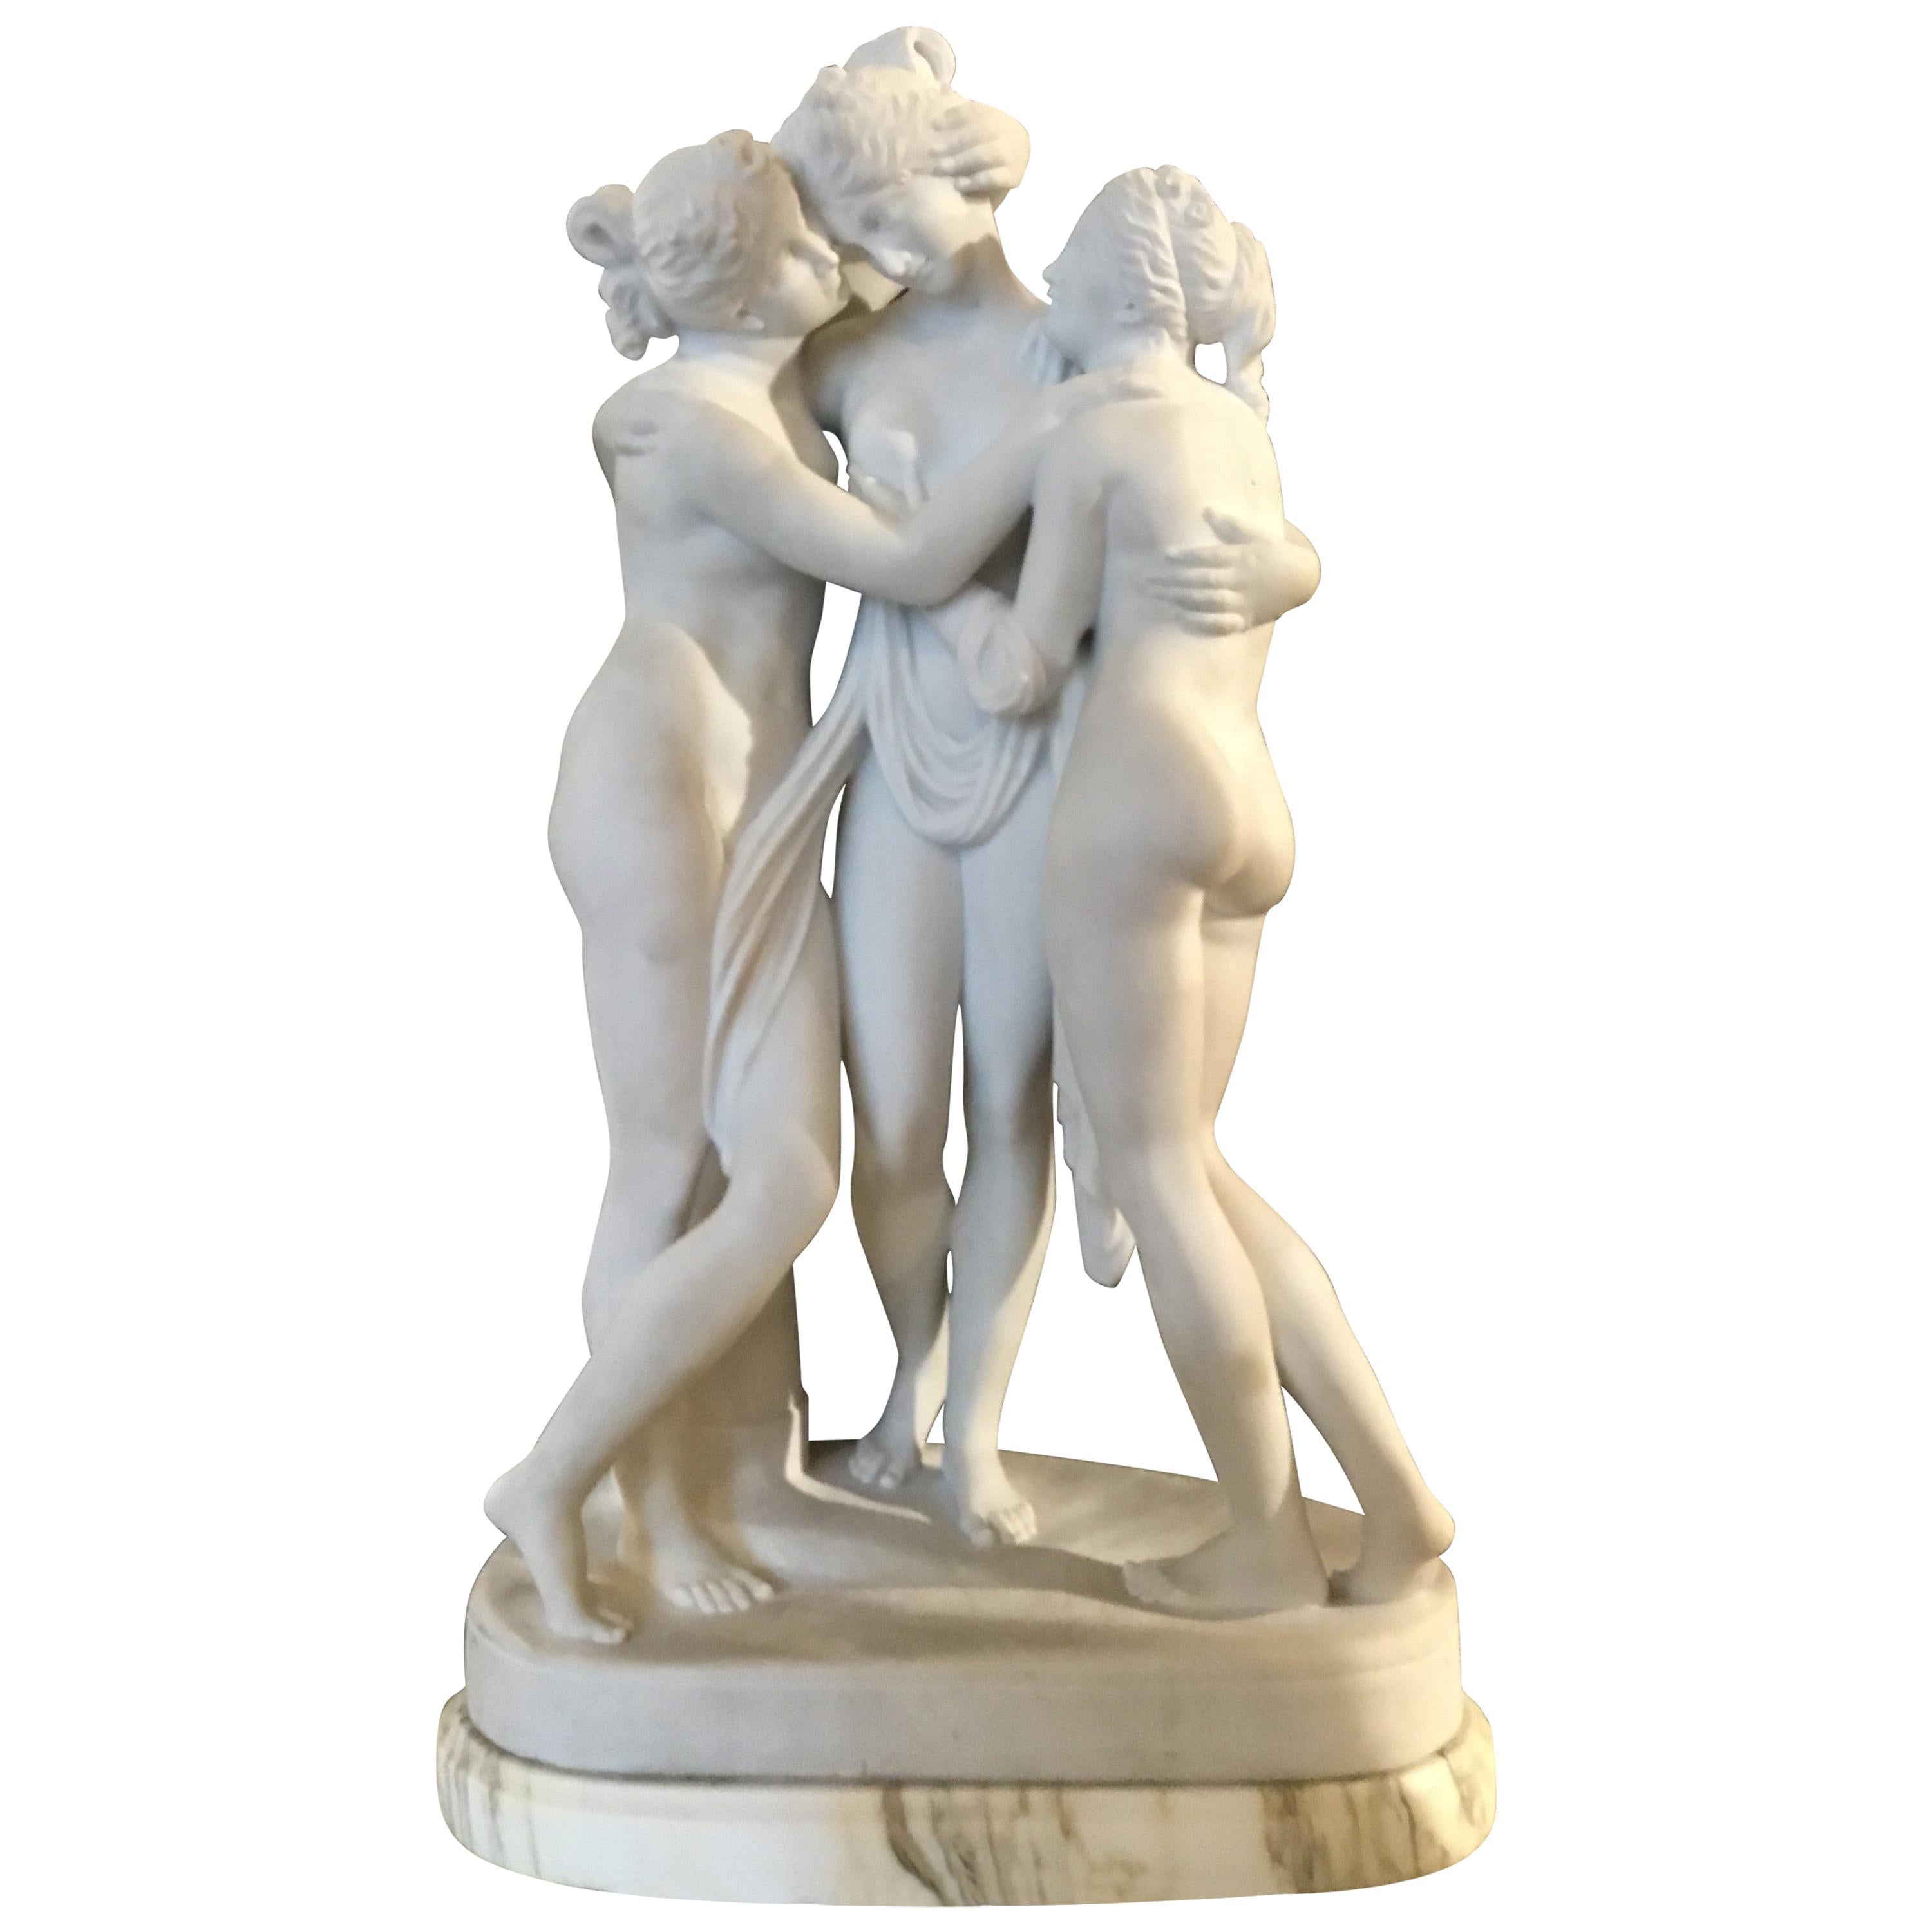 “The Three Graces” Sculpture, 20th Century, Carved Marble after Antonio Canova